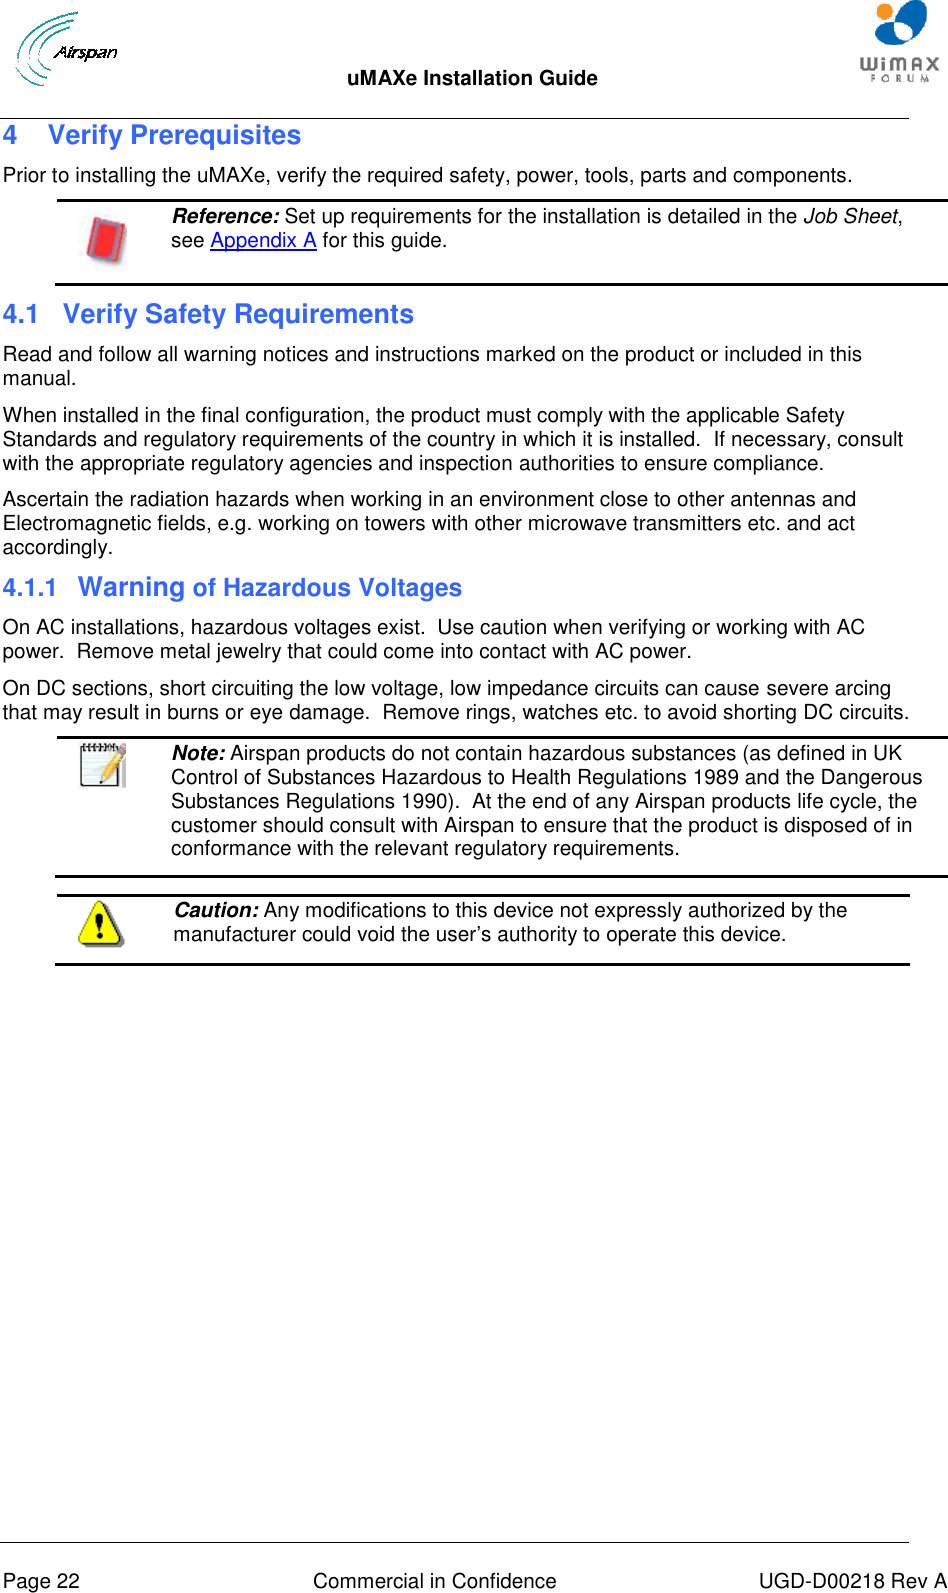  uMAXe Installation Guide       Page 22  Commercial in Confidence  UGD-D00218 Rev A 4  Verify Prerequisites Prior to installing the uMAXe, verify the required safety, power, tools, parts and components.  Reference: Set up requirements for the installation is detailed in the Job Sheet, see Appendix A for this guide. 4.1  Verify Safety Requirements Read and follow all warning notices and instructions marked on the product or included in this manual. When installed in the final configuration, the product must comply with the applicable Safety Standards and regulatory requirements of the country in which it is installed.  If necessary, consult with the appropriate regulatory agencies and inspection authorities to ensure compliance. Ascertain the radiation hazards when working in an environment close to other antennas and Electromagnetic fields, e.g. working on towers with other microwave transmitters etc. and act accordingly. 4.1.1  Warning of Hazardous Voltages On AC installations, hazardous voltages exist.  Use caution when verifying or working with AC power.  Remove metal jewelry that could come into contact with AC power. On DC sections, short circuiting the low voltage, low impedance circuits can cause severe arcing that may result in burns or eye damage.  Remove rings, watches etc. to avoid shorting DC circuits.   Note: Airspan products do not contain hazardous substances (as defined in UK Control of Substances Hazardous to Health Regulations 1989 and the Dangerous Substances Regulations 1990).  At the end of any Airspan products life cycle, the customer should consult with Airspan to ensure that the product is disposed of in conformance with the relevant regulatory requirements.   Caution: Any modifications to this device not expressly authorized by the manufacturer could void the user‟s authority to operate this device.  